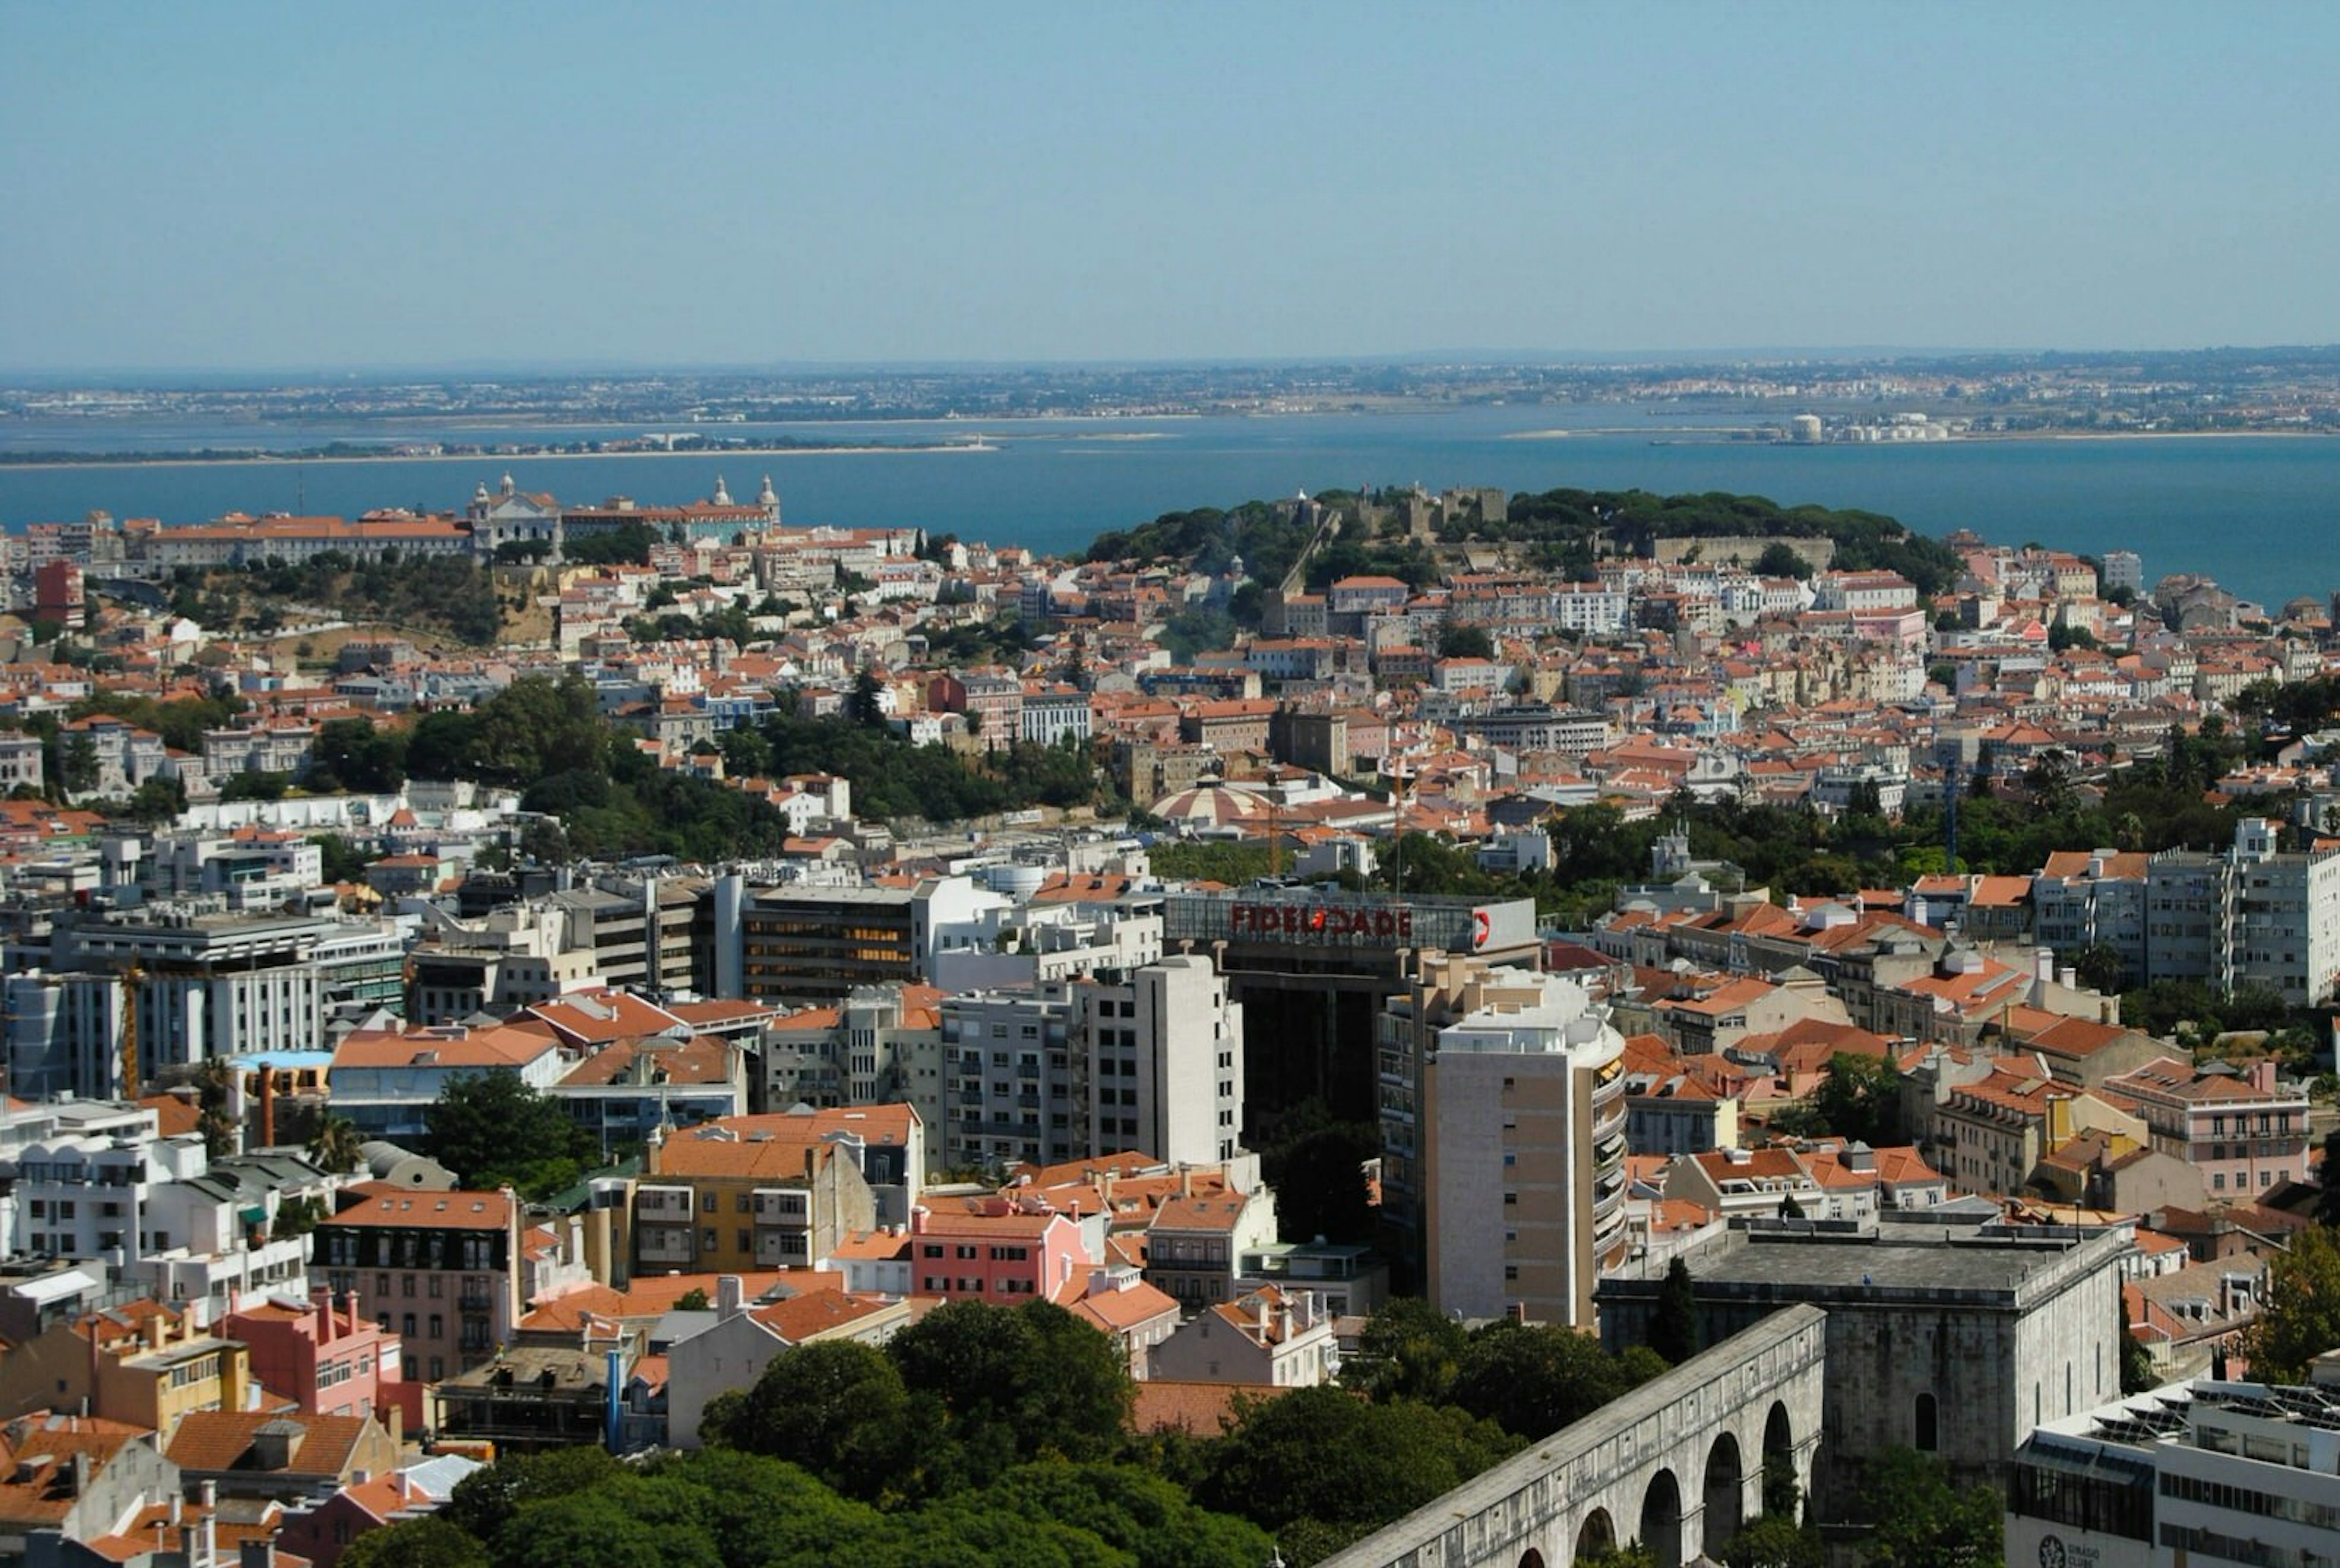 Looking out over Lisbon from the top of Amoreiras Shopping Mall © Sandra Henriques Gajjar / Lonely Planet